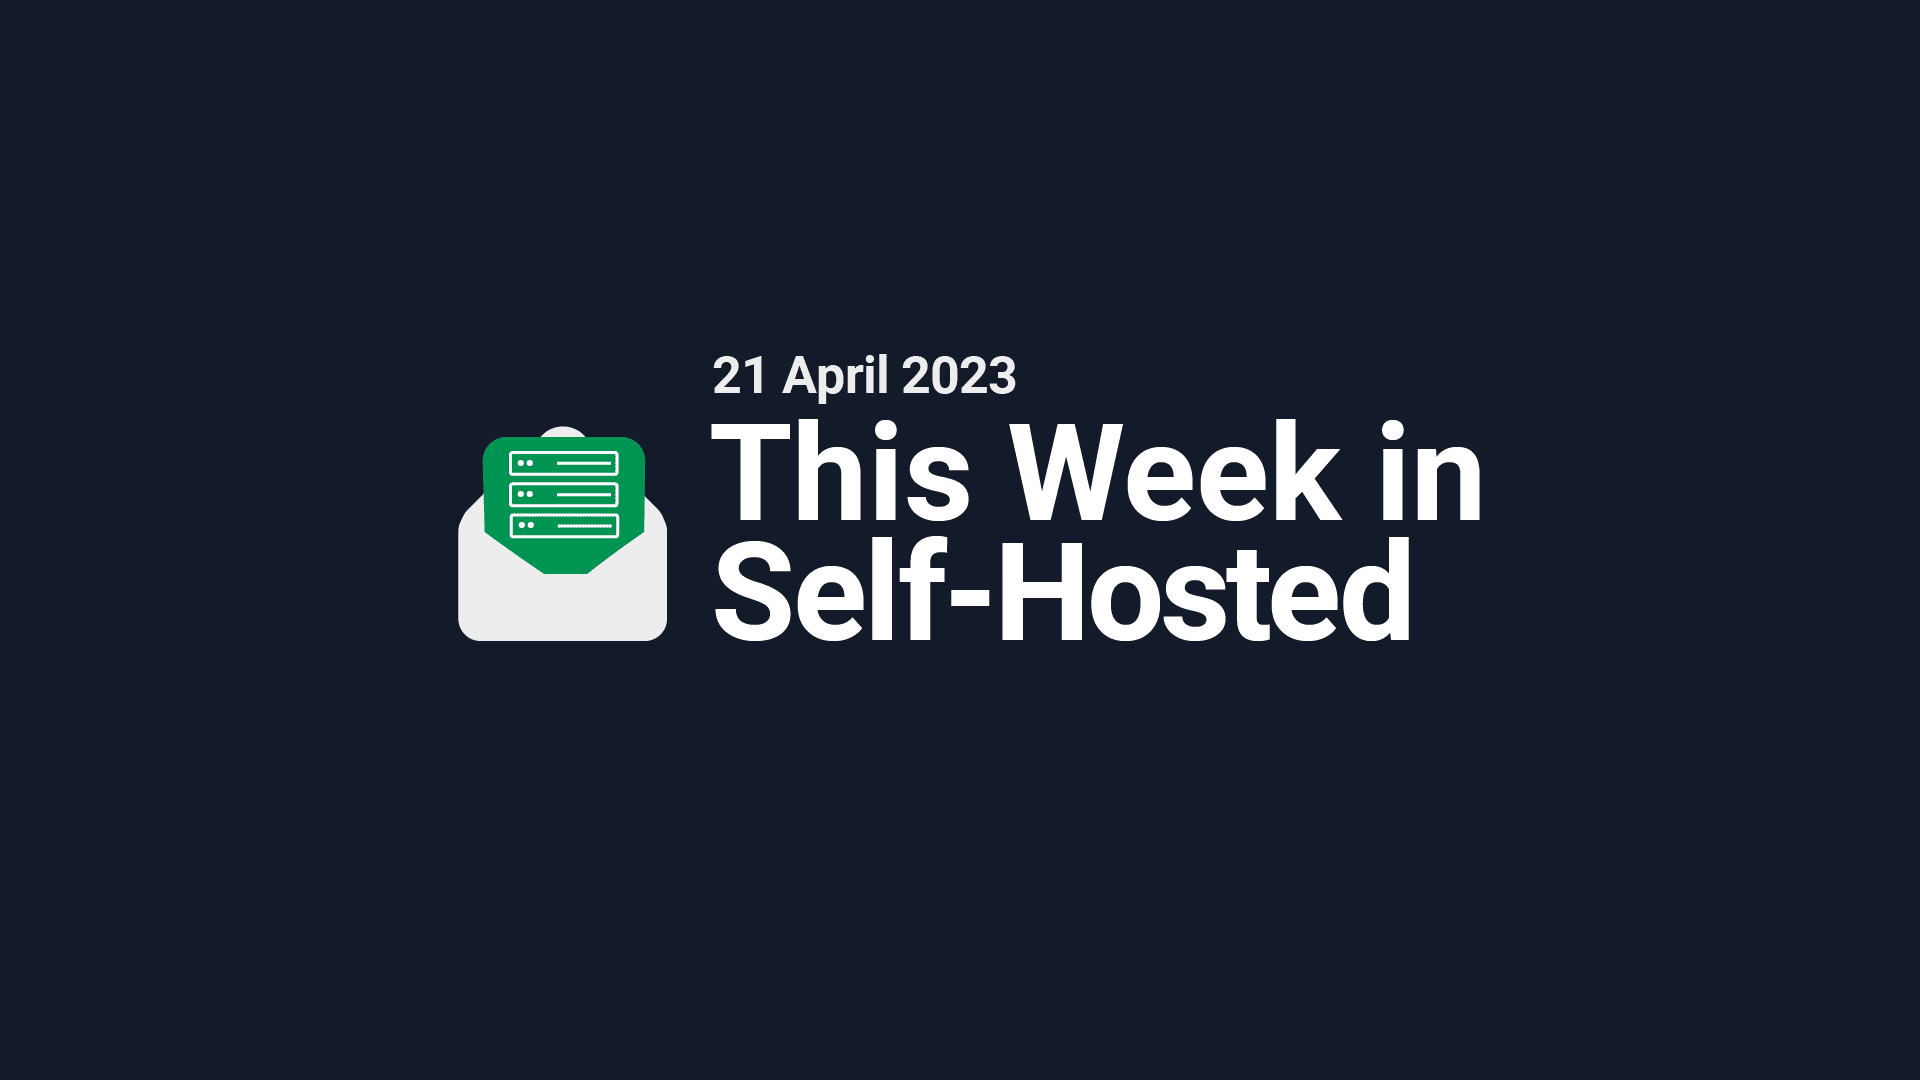 This Week in Self-Hosted (21 April 2023) Post image